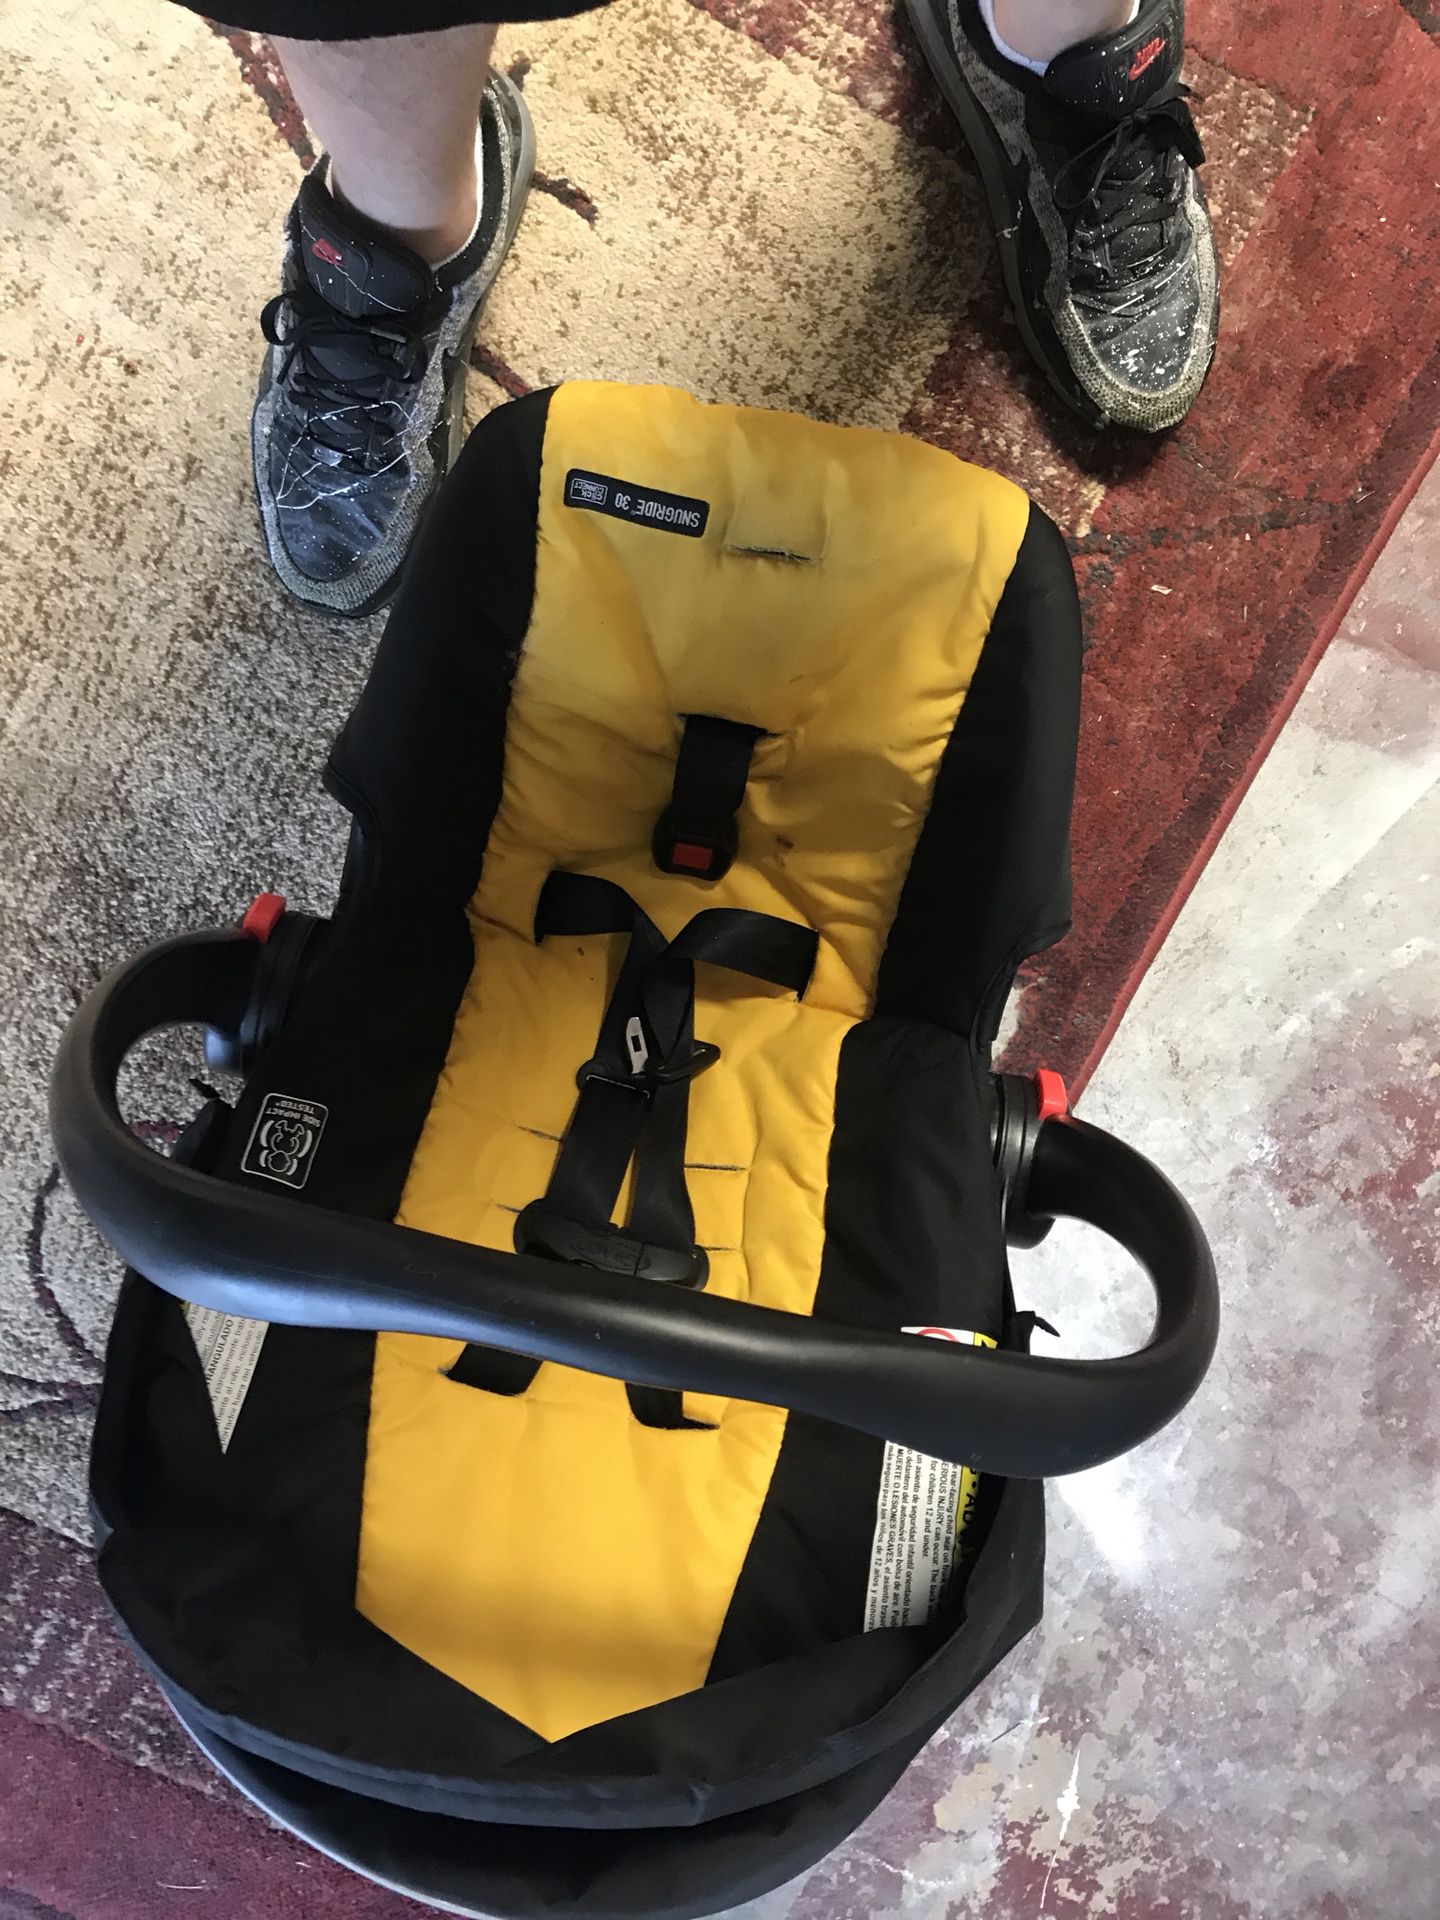 Graco stroller and car seat combo